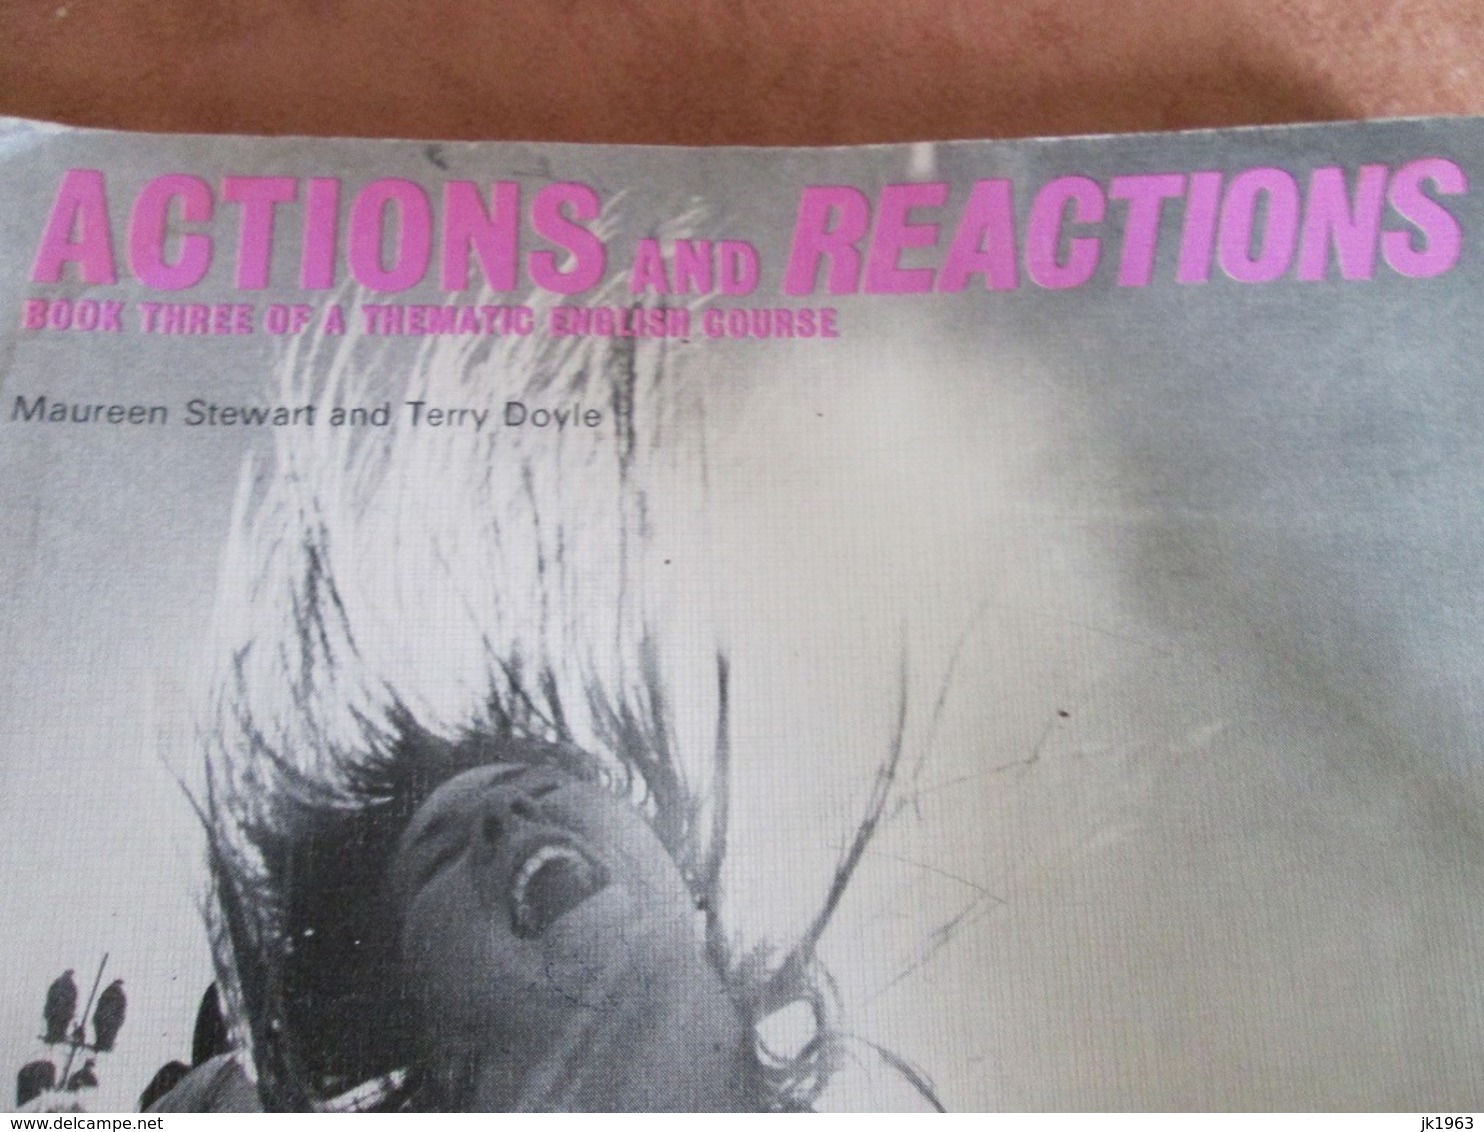 ACTIONS AND REACTIONS, MAUREEN STEWART, TERRY DOYLE 1973 - Culture